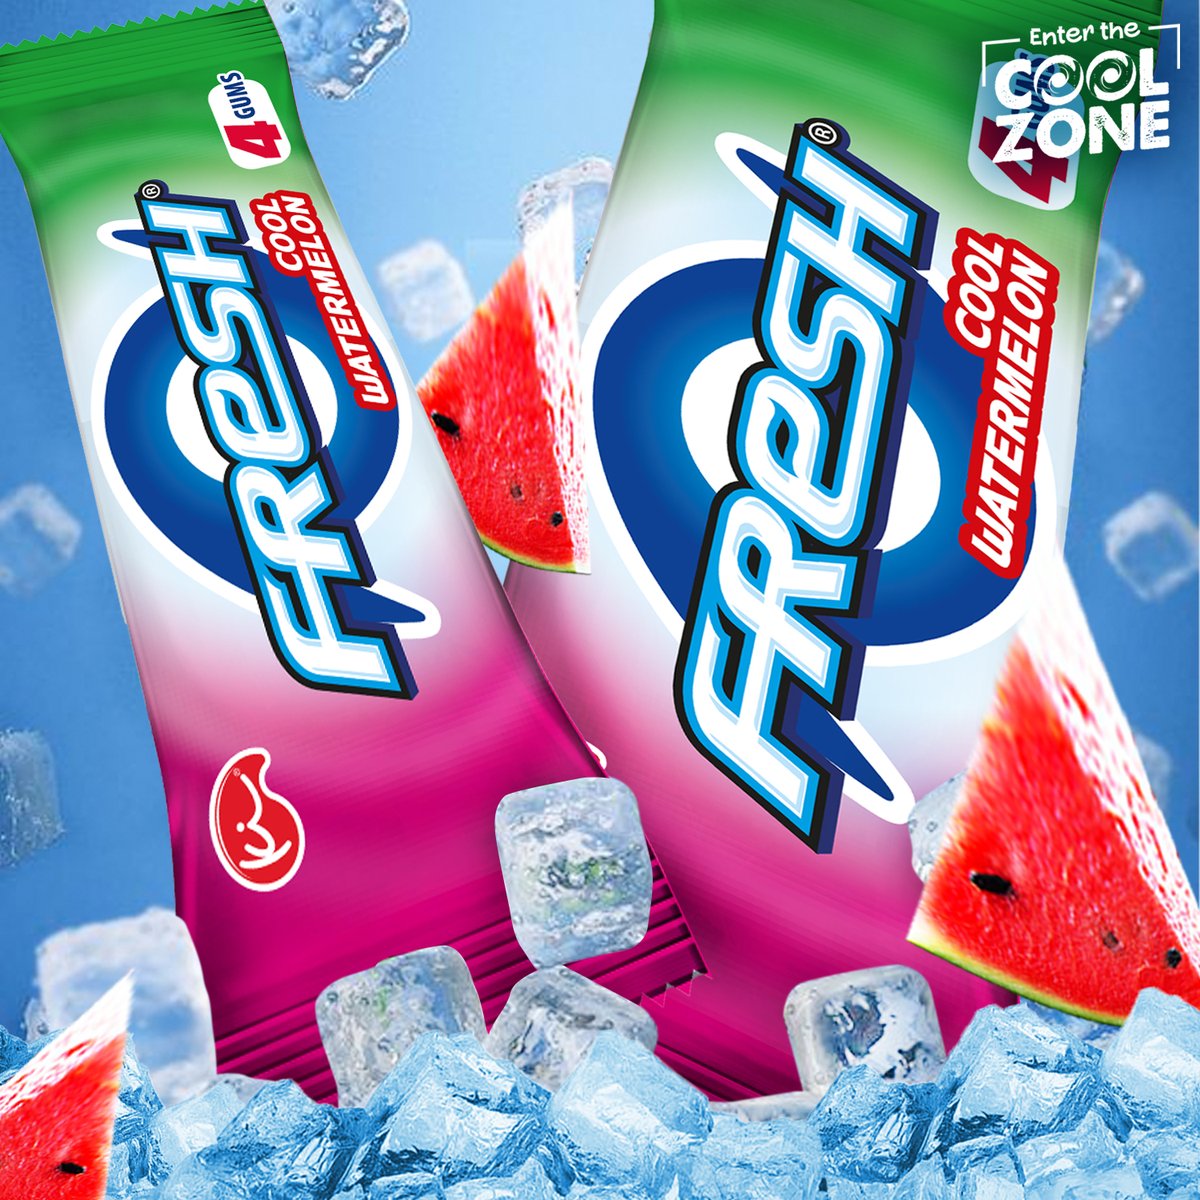 The only thing better than Fresh Watermelon, is two of them! #EnterTheCoolZone #FreshChewingGum